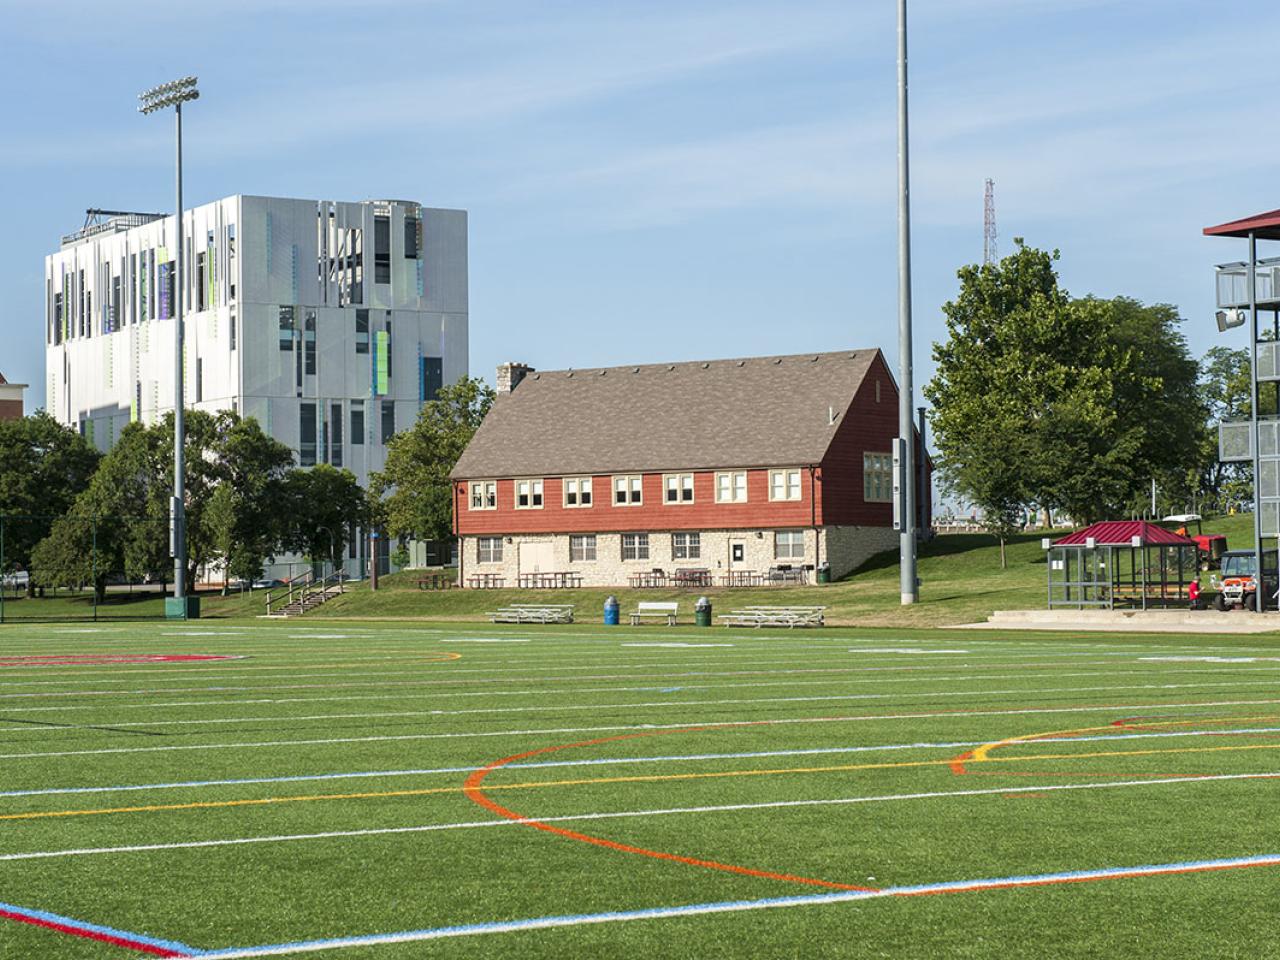 An exterior view of the Women's Field House